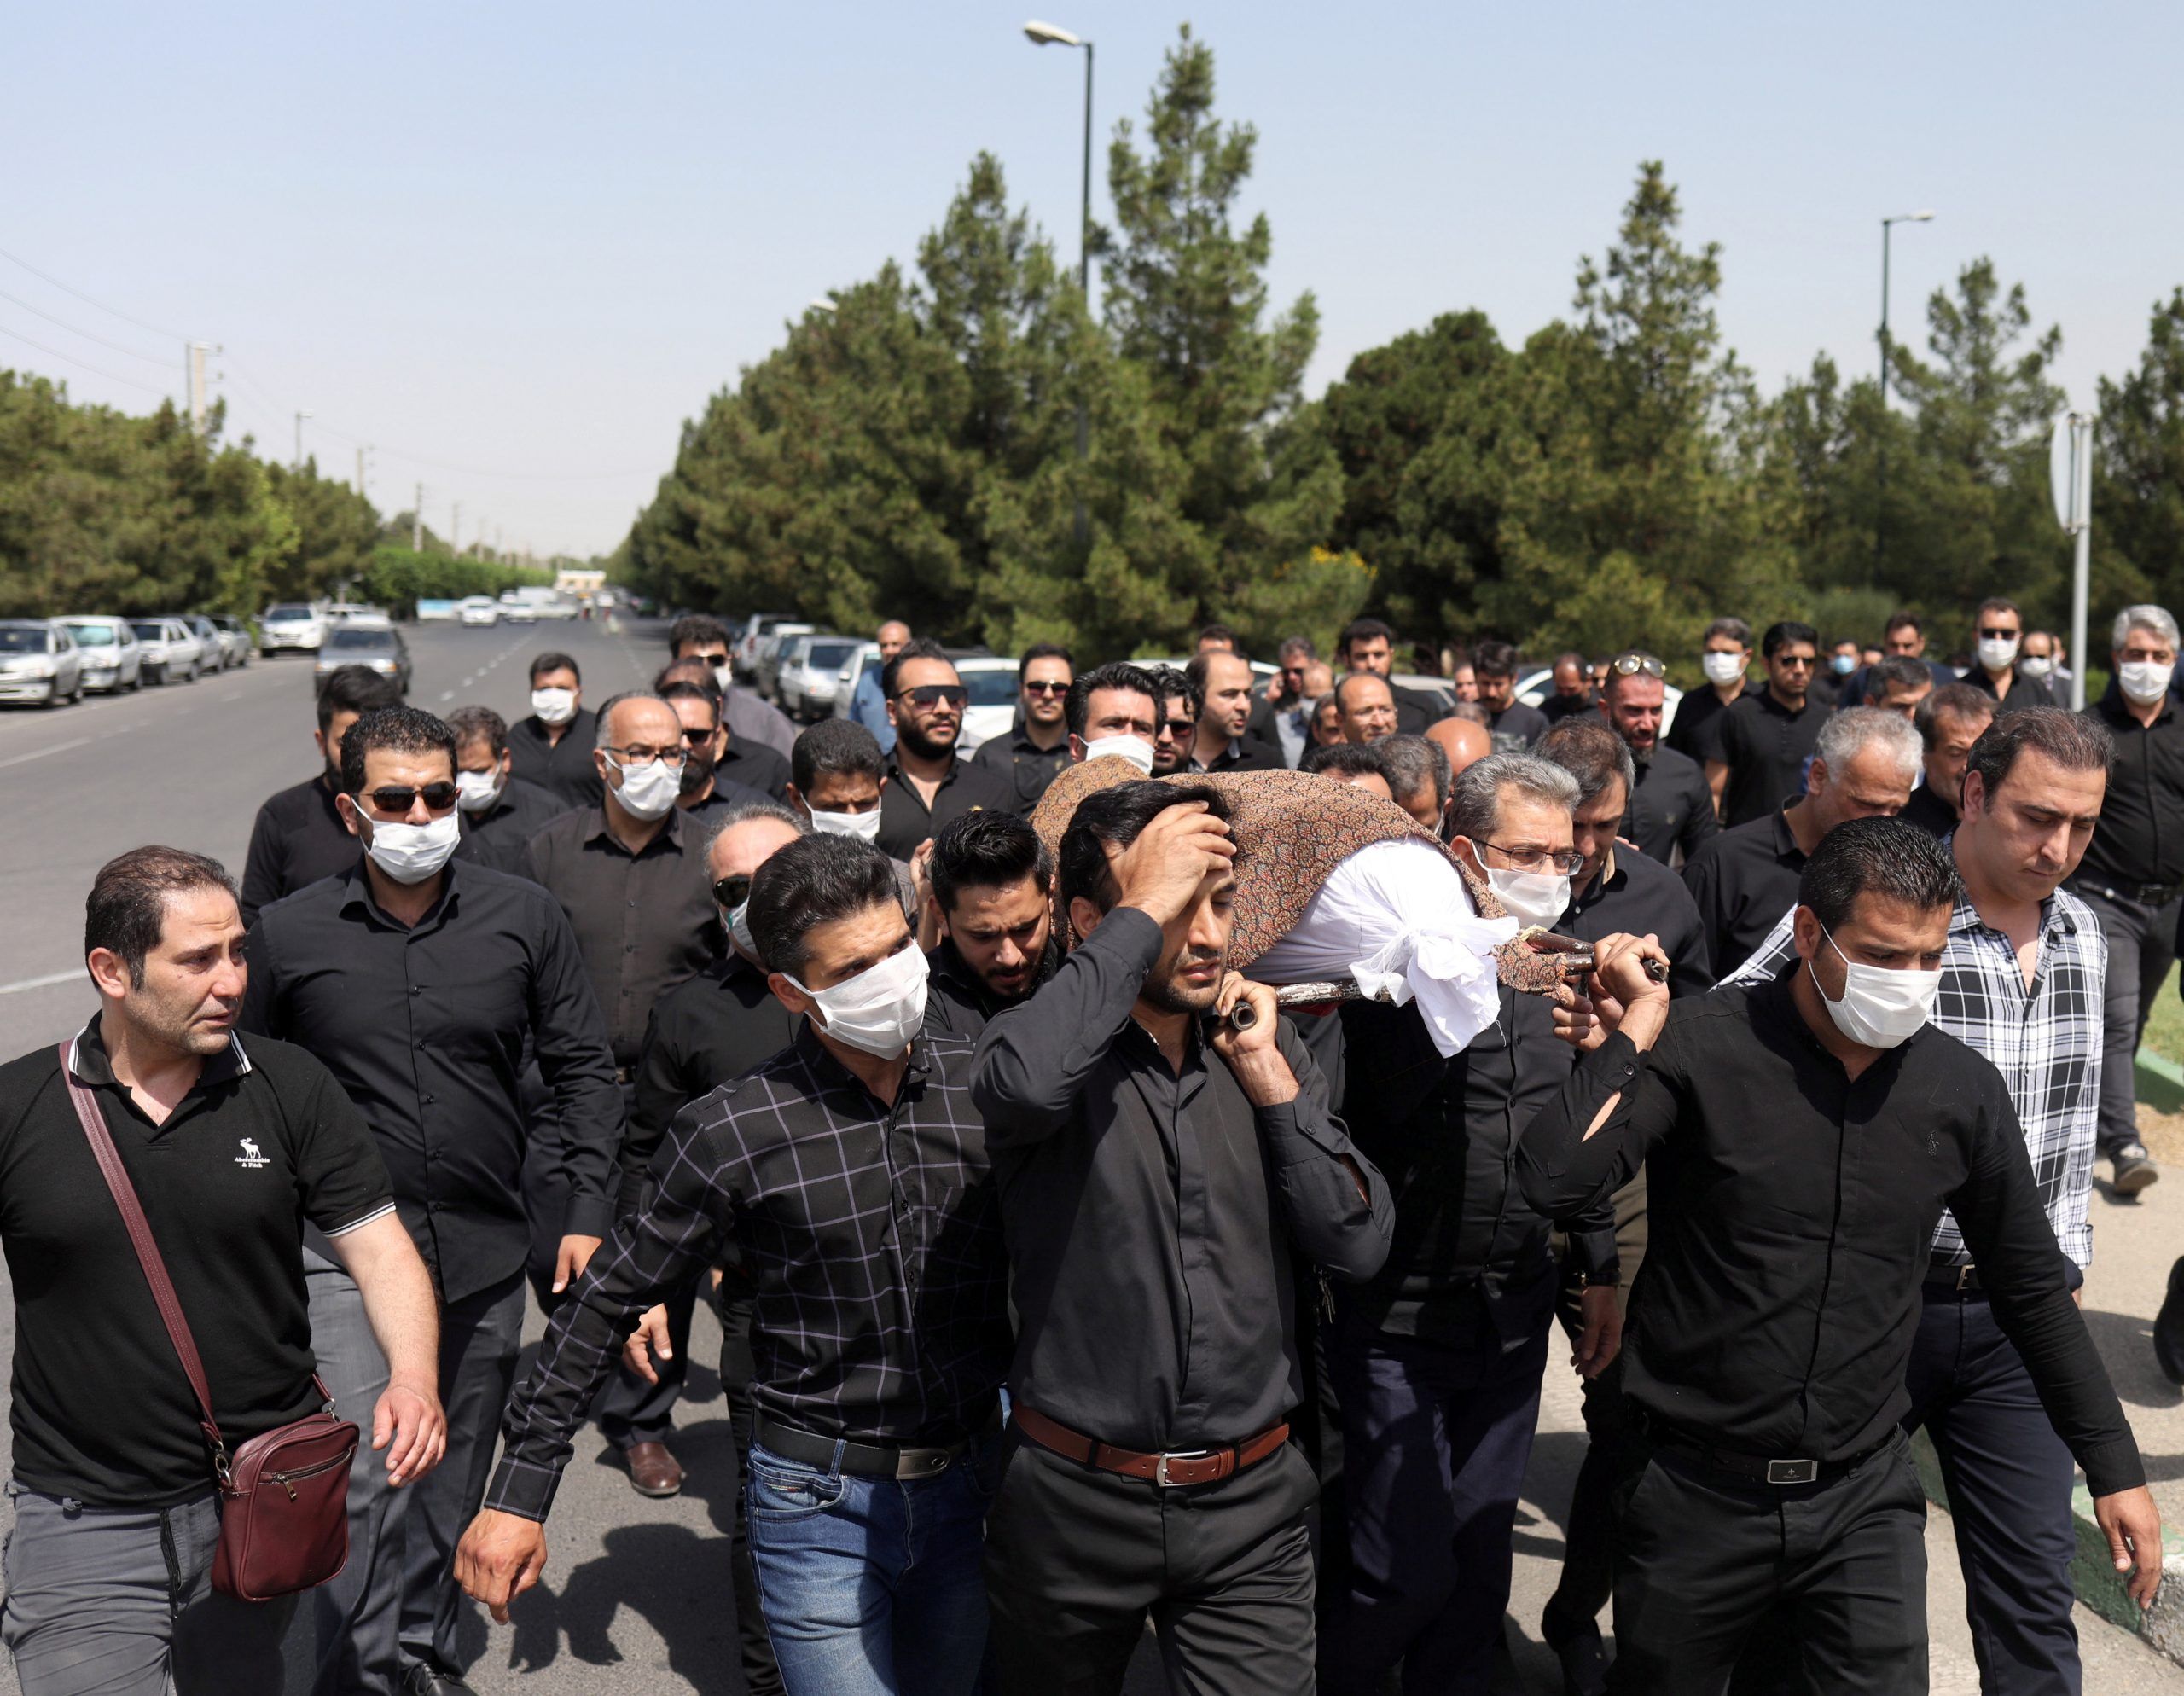 Iranians wearing protective face masks carry a coffin during a funeral ceremony, following the outbreak of the coronavirus disease (COVID-19), in Tehran, Iran June 11, 2020. REUTERS./